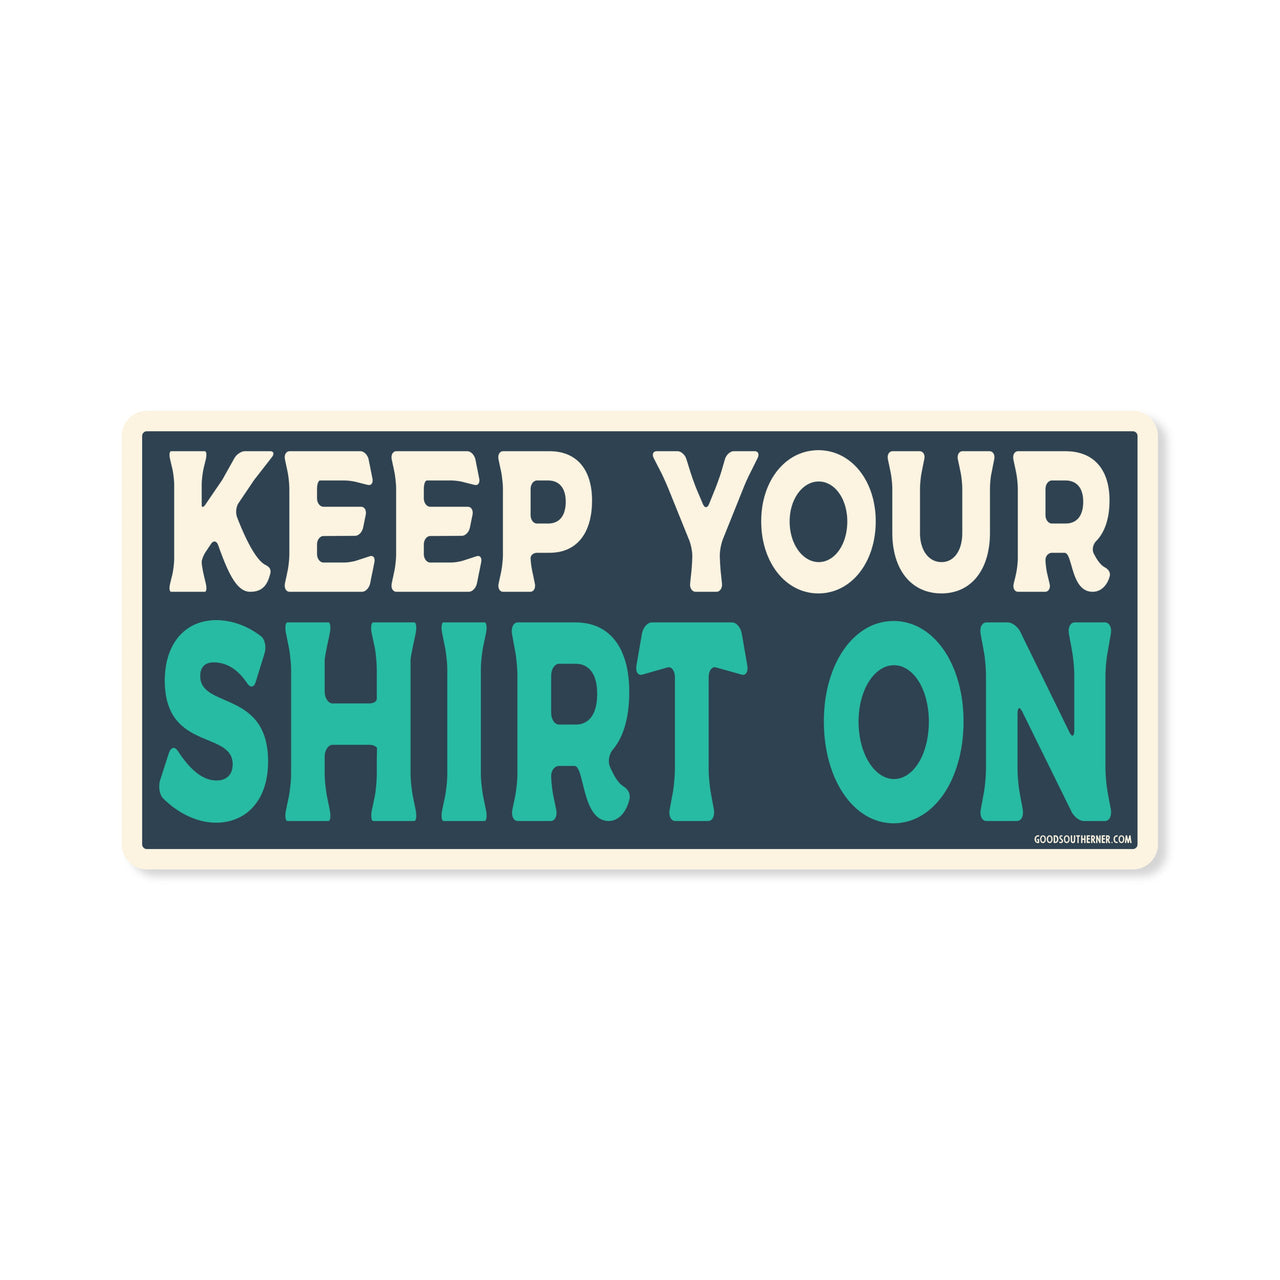 Keep Your Shirt On Sticker